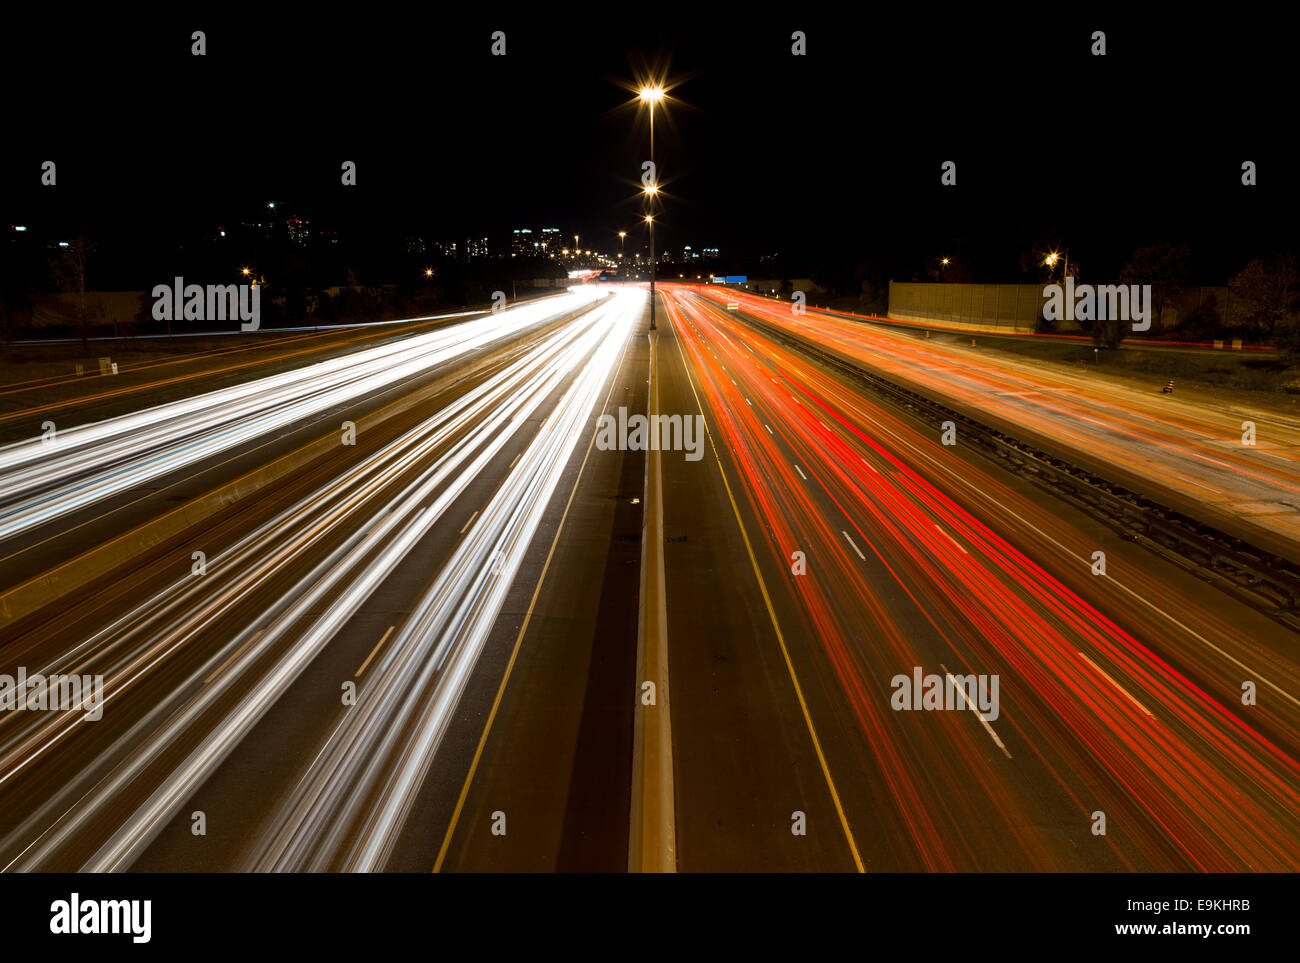 A view of Light trails on a highway Stock Photo